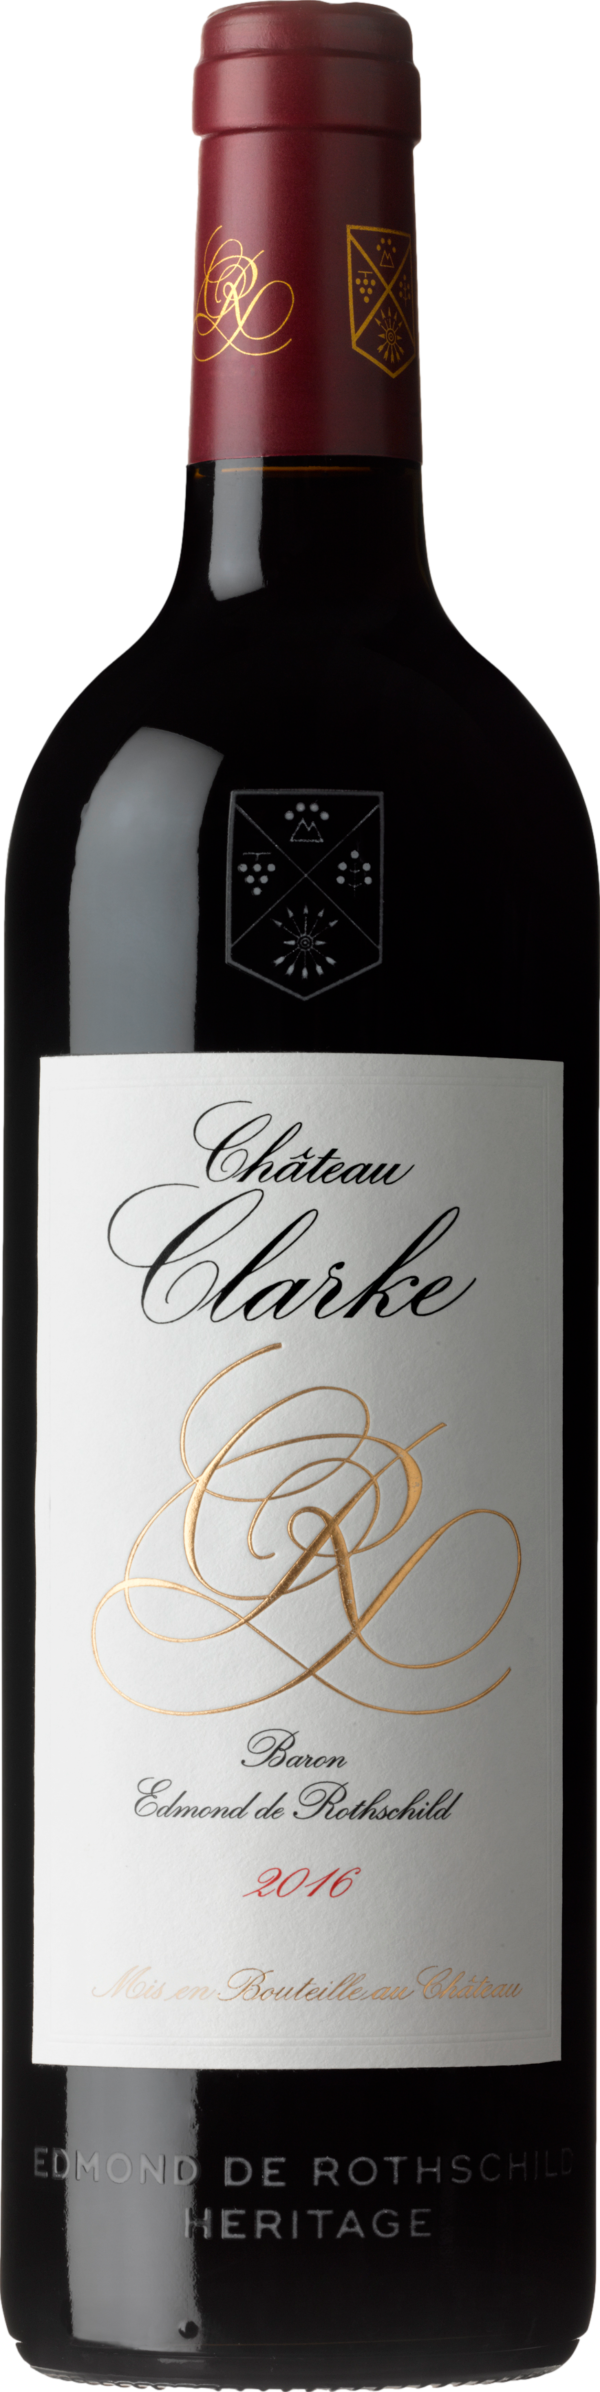 Product image of Edmond de Rothschild Chateau Clarke 2016 from 8wines